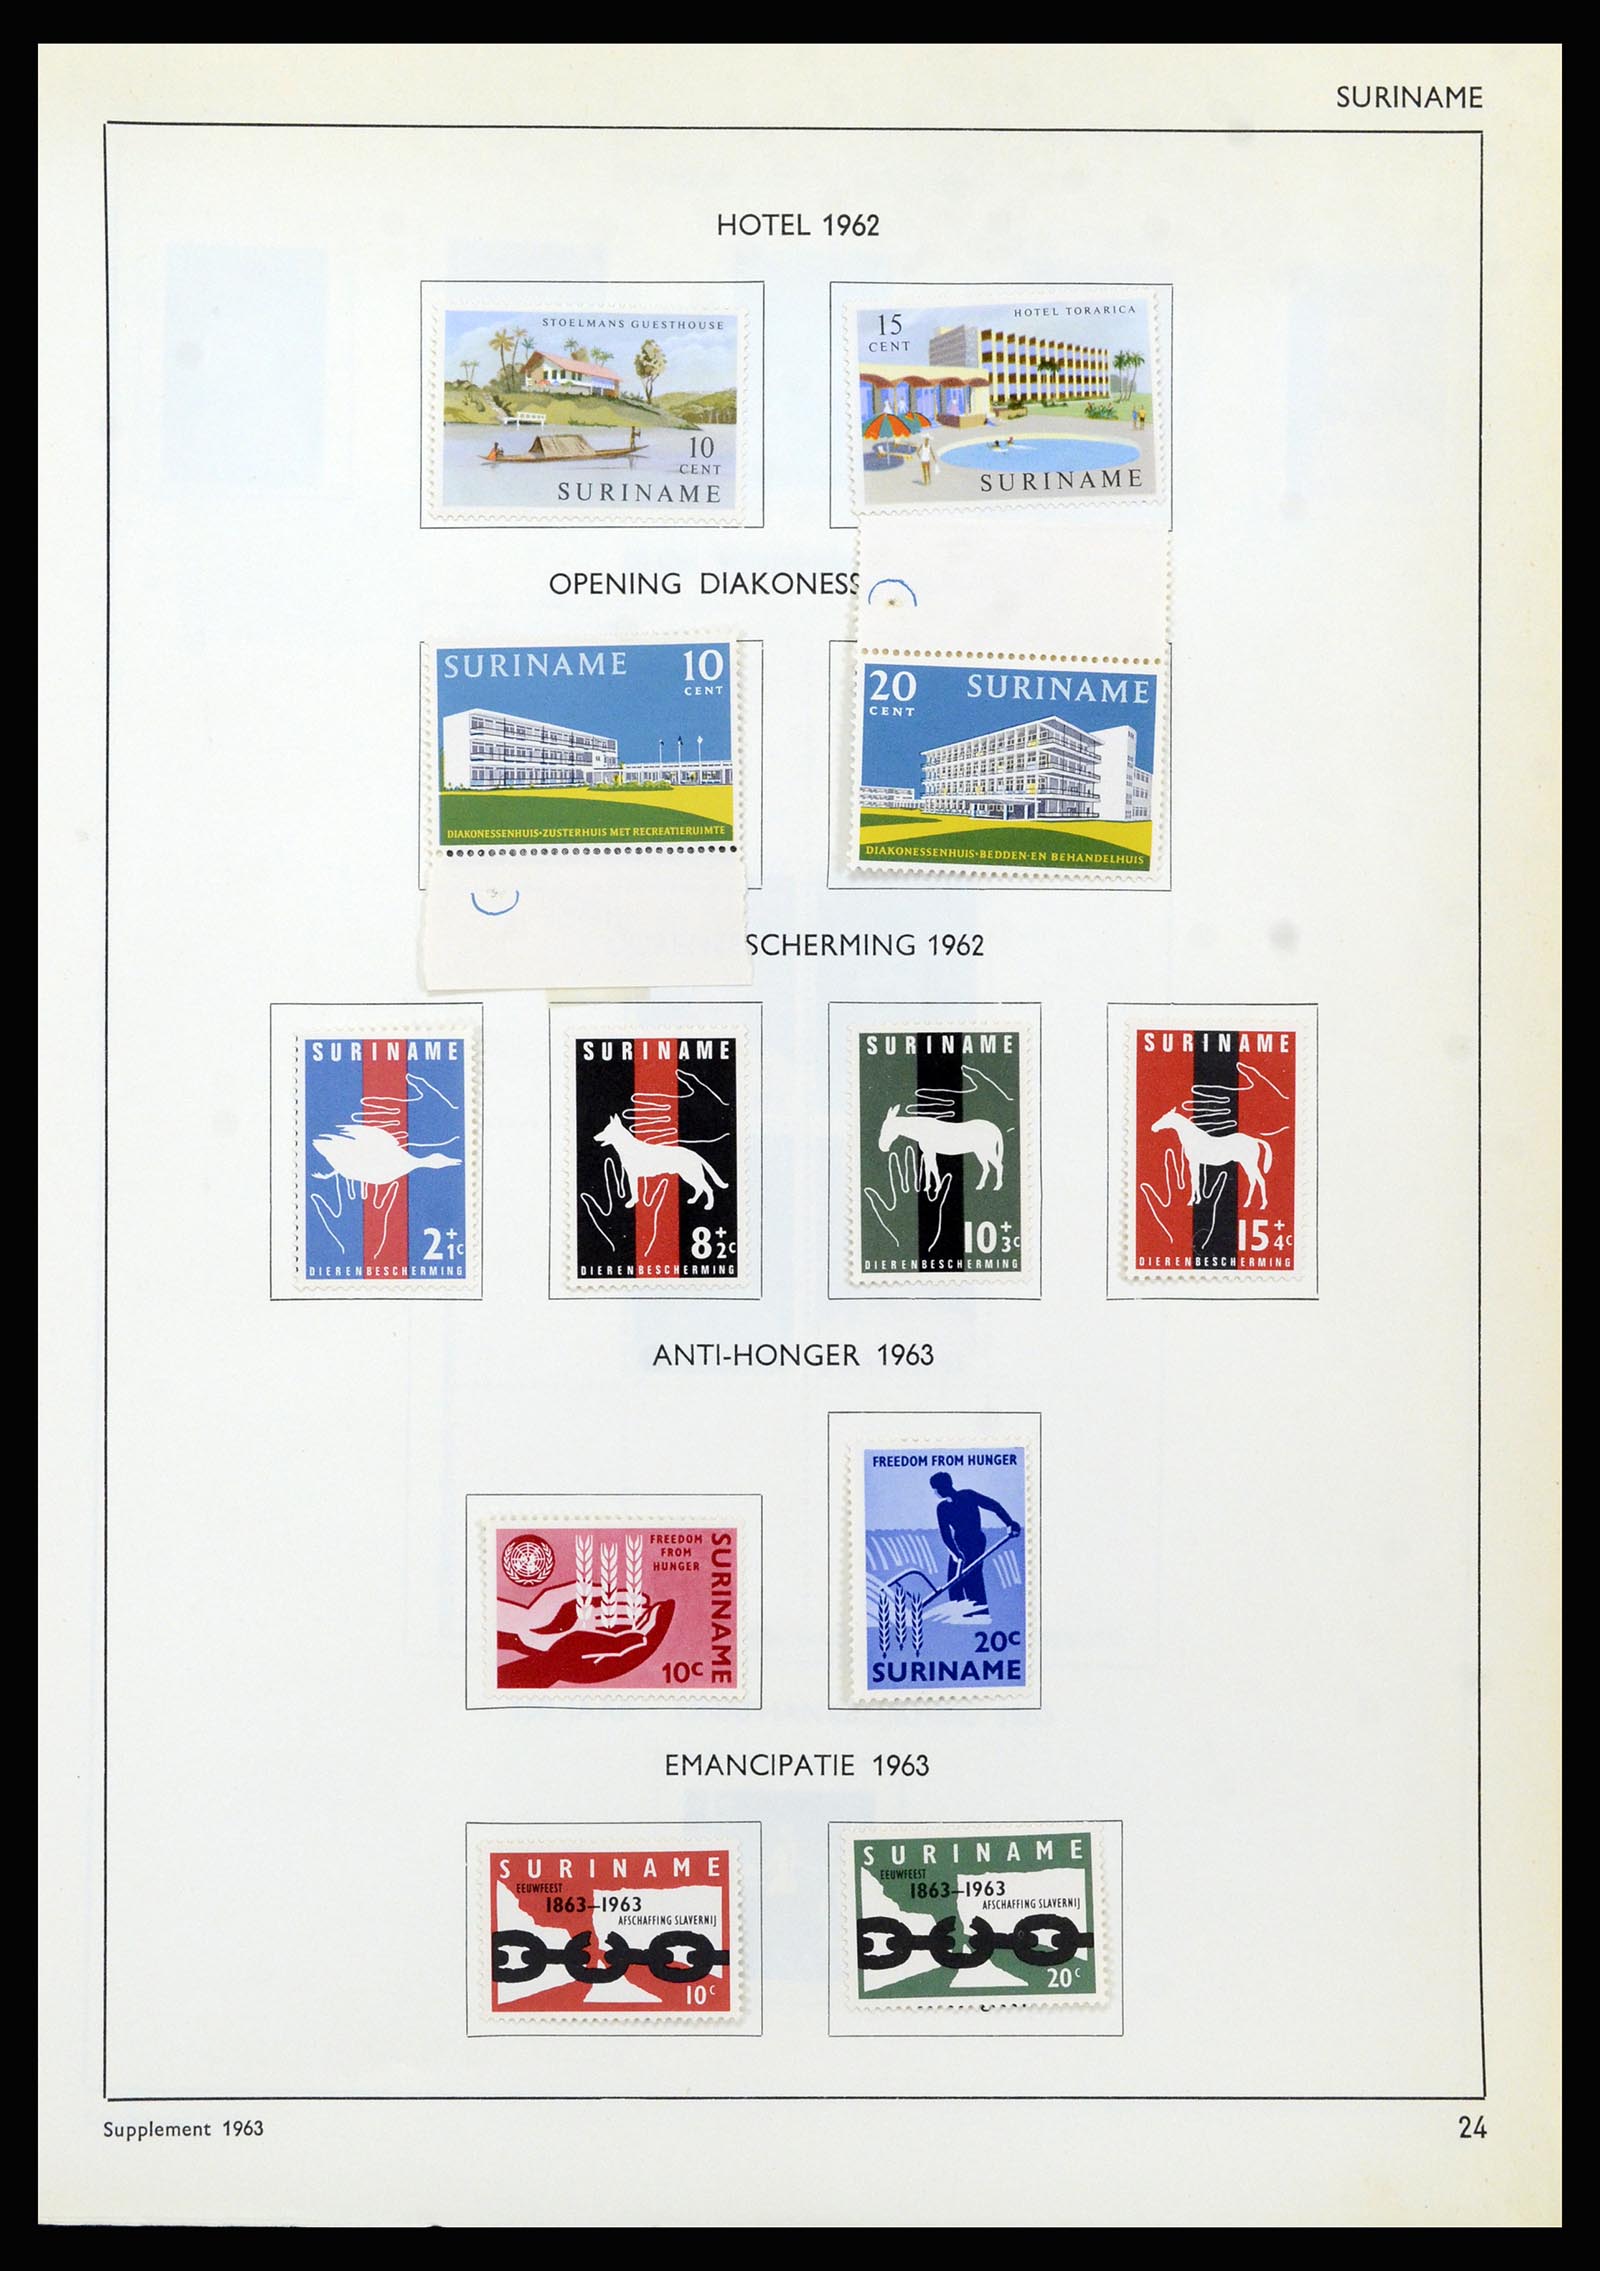 37217 107 - Stamp collection 37217 Dutch territories 1864-1975.